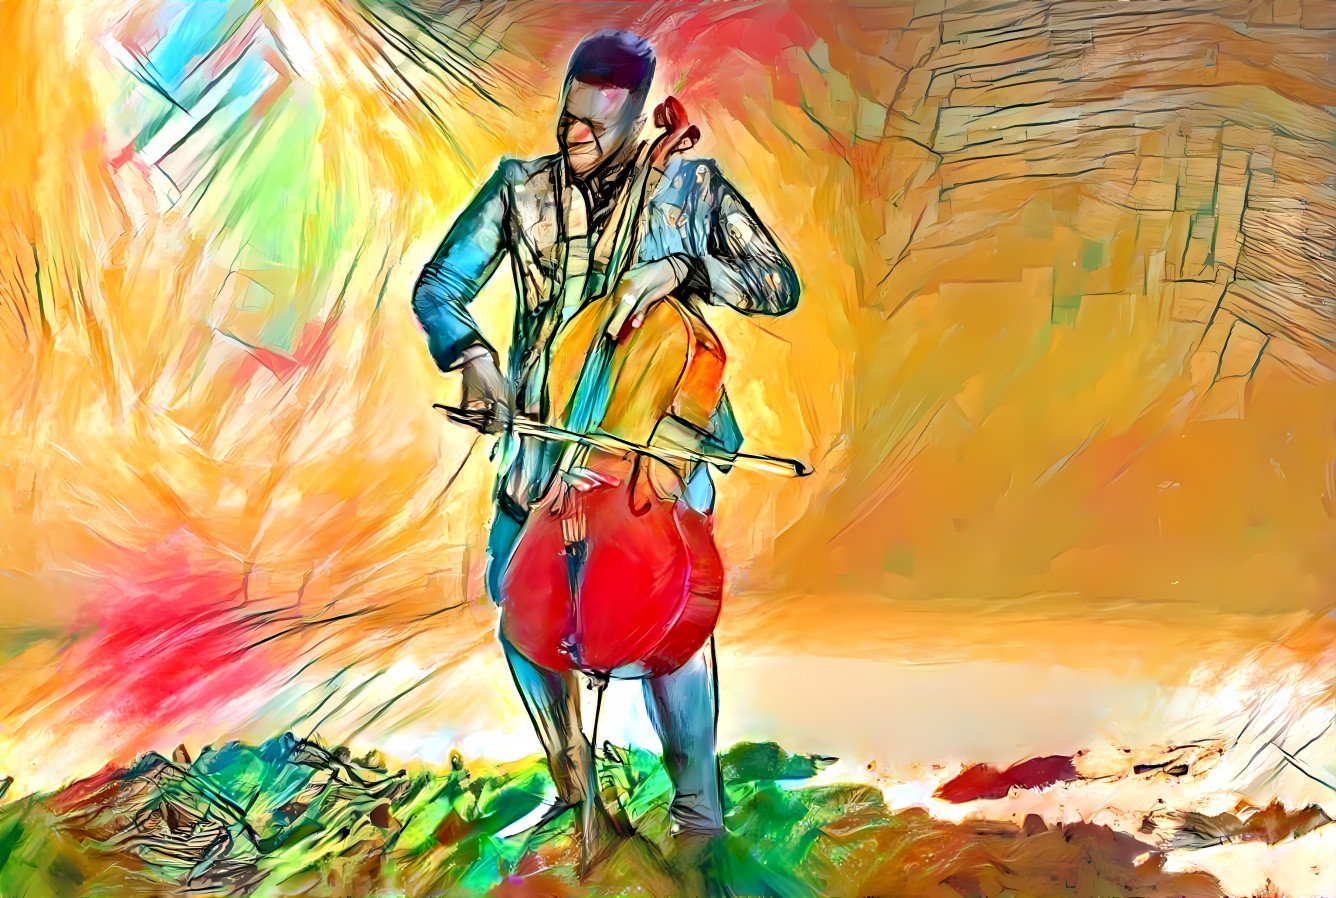 The pleasure of playing the cello